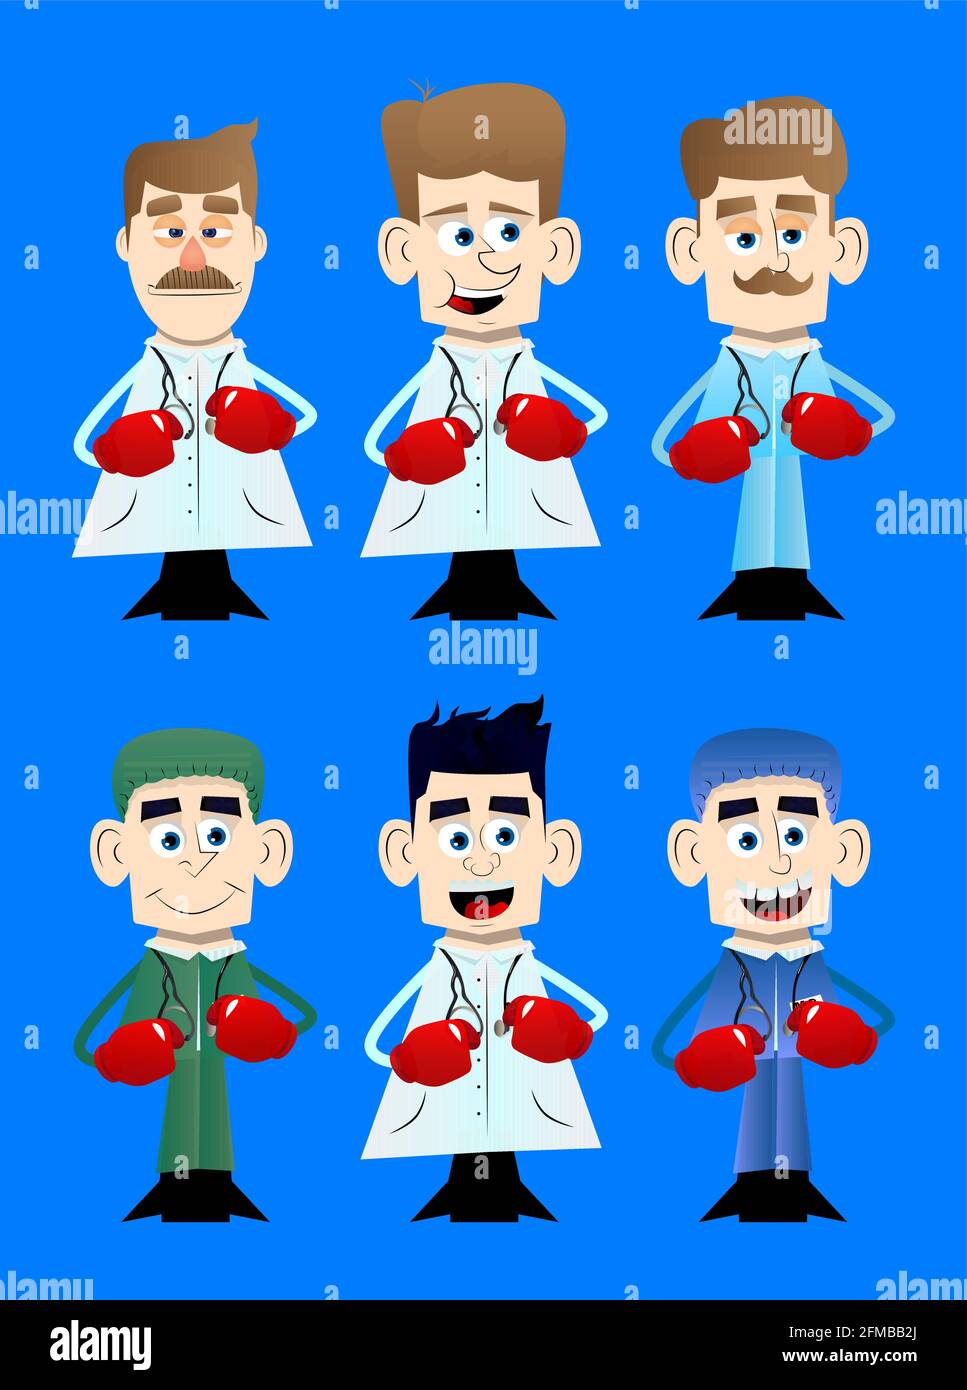 Funny cartoon doctor holding his fists in front of him ready to fight wearing boxing gloves. Vector illustration. Stock Vector